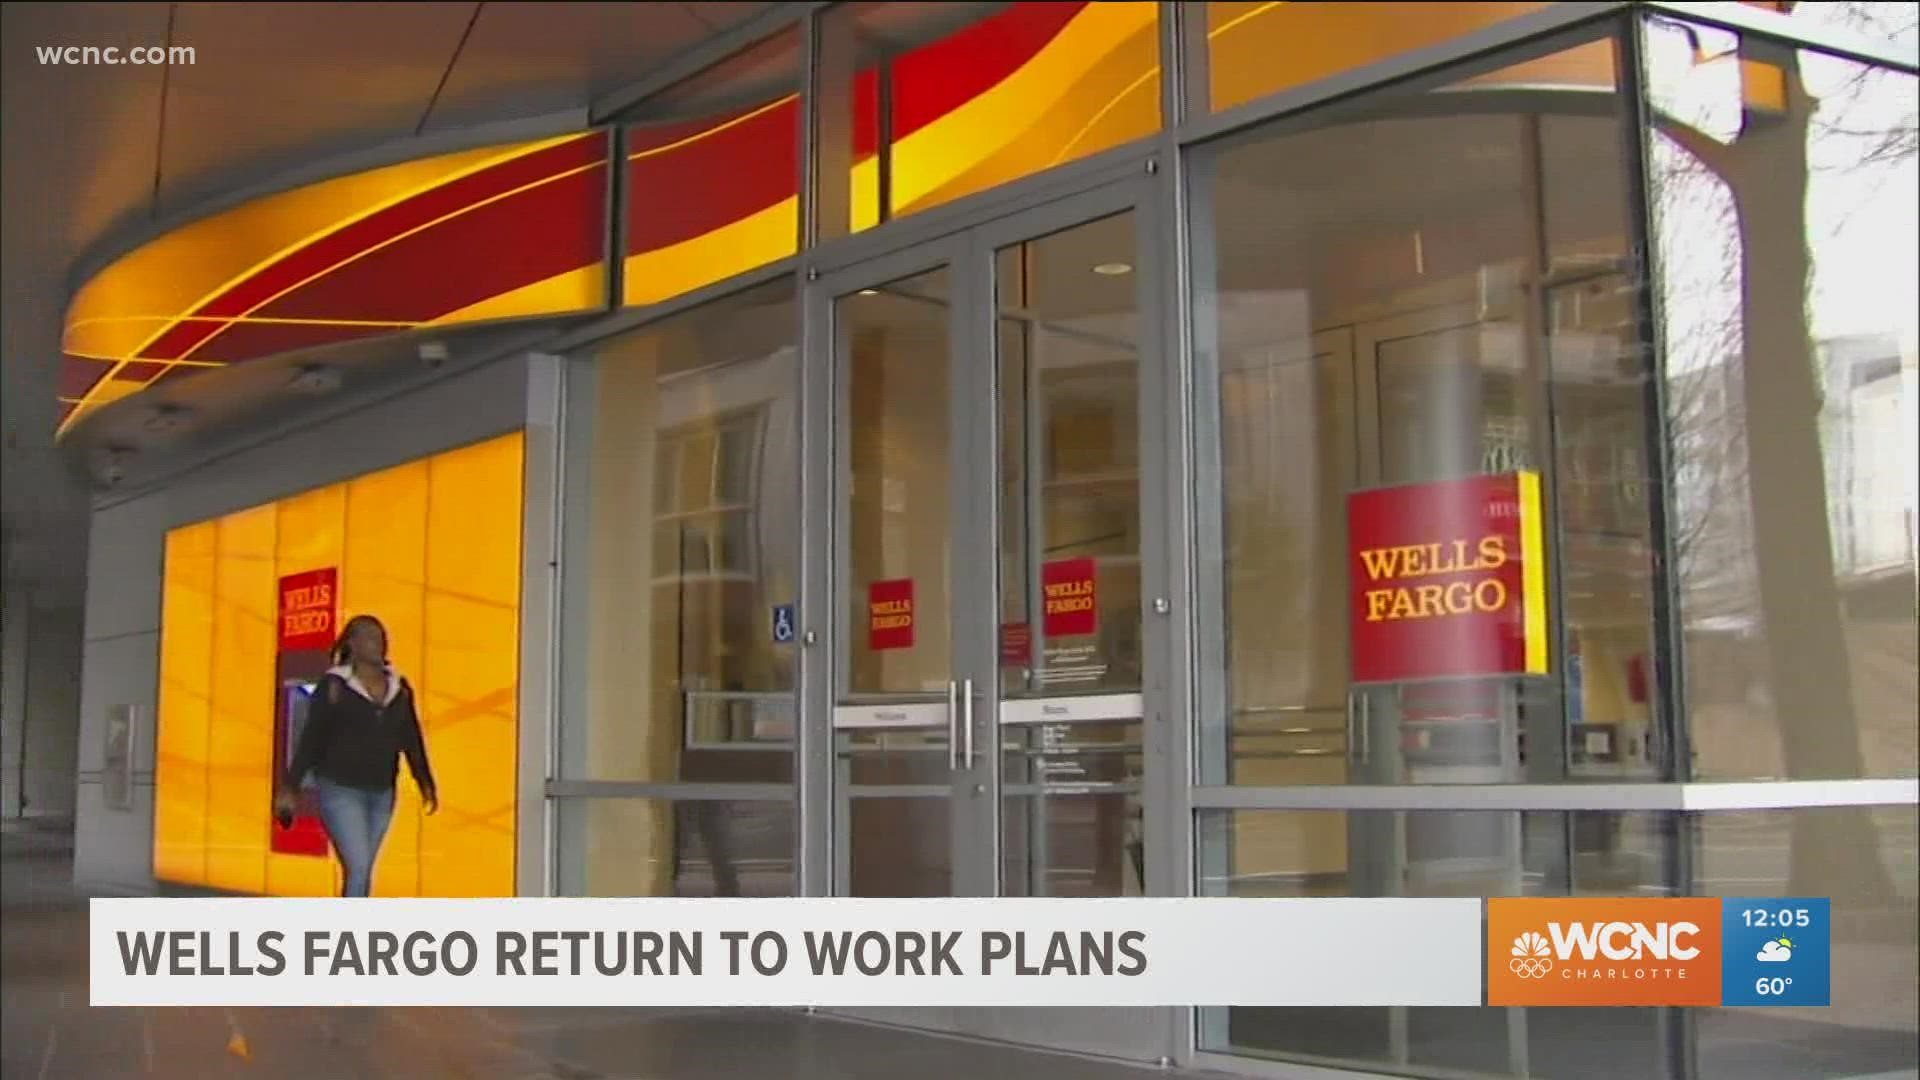 Wells Fargo, one of the largest employers in Charlotte, will welcome most employees back to the office in mid-March, according to a memo sent to U.S. workers.